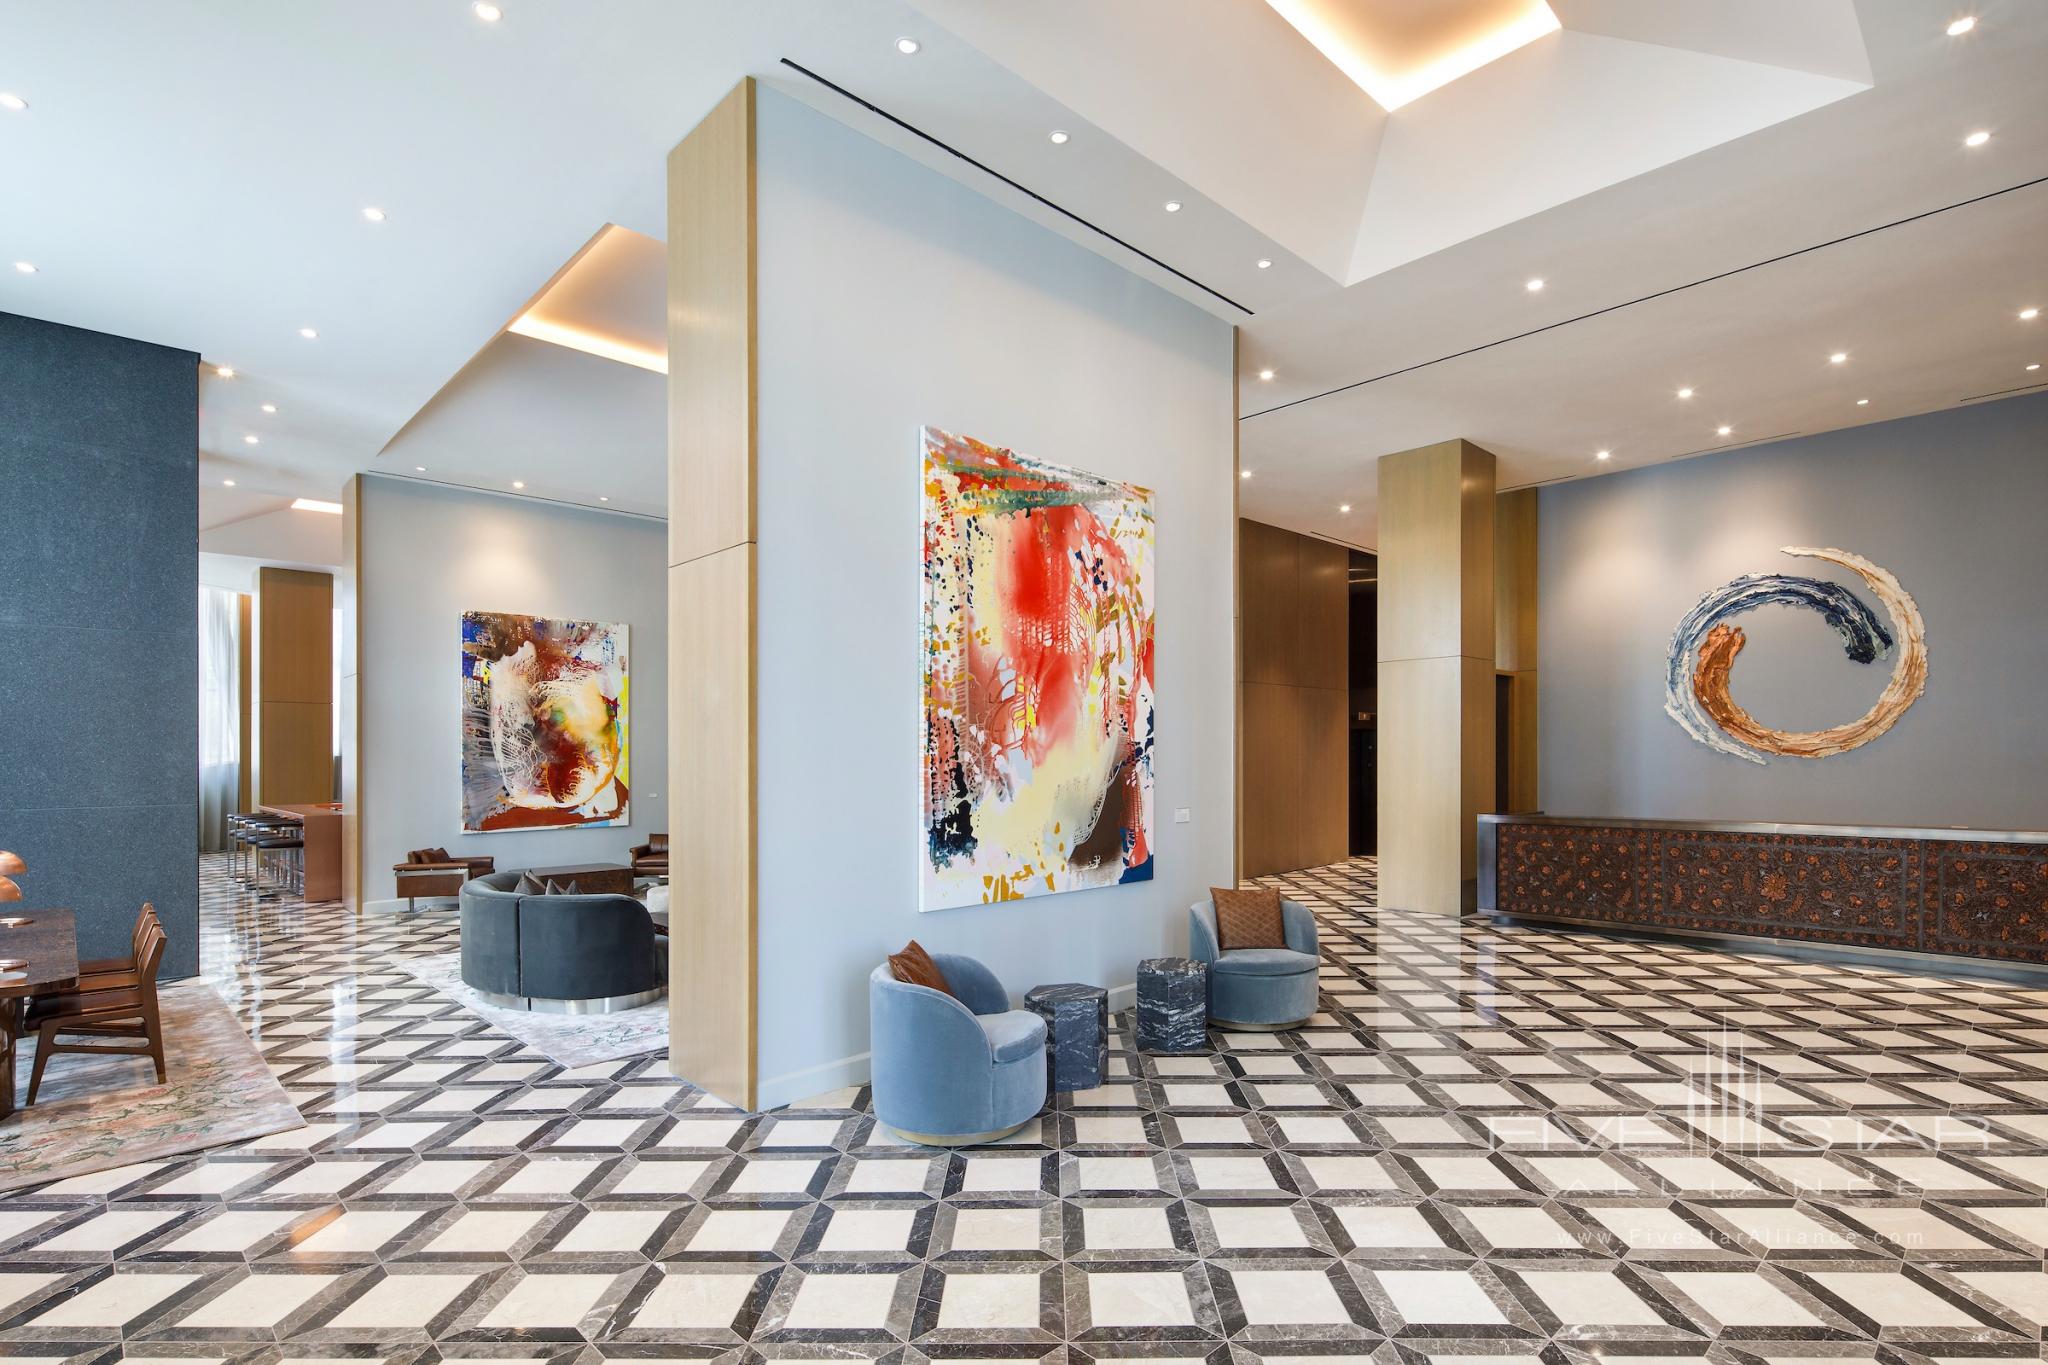 The lobby at The Joseph, a Luxury Collection Hotel, Nashville, features a custom-designed reception desk with leather paneling by Lucchese, and ceramic art by artist Brie Ruais (behind desk) and paintings by artist Jackie Saccoccio.